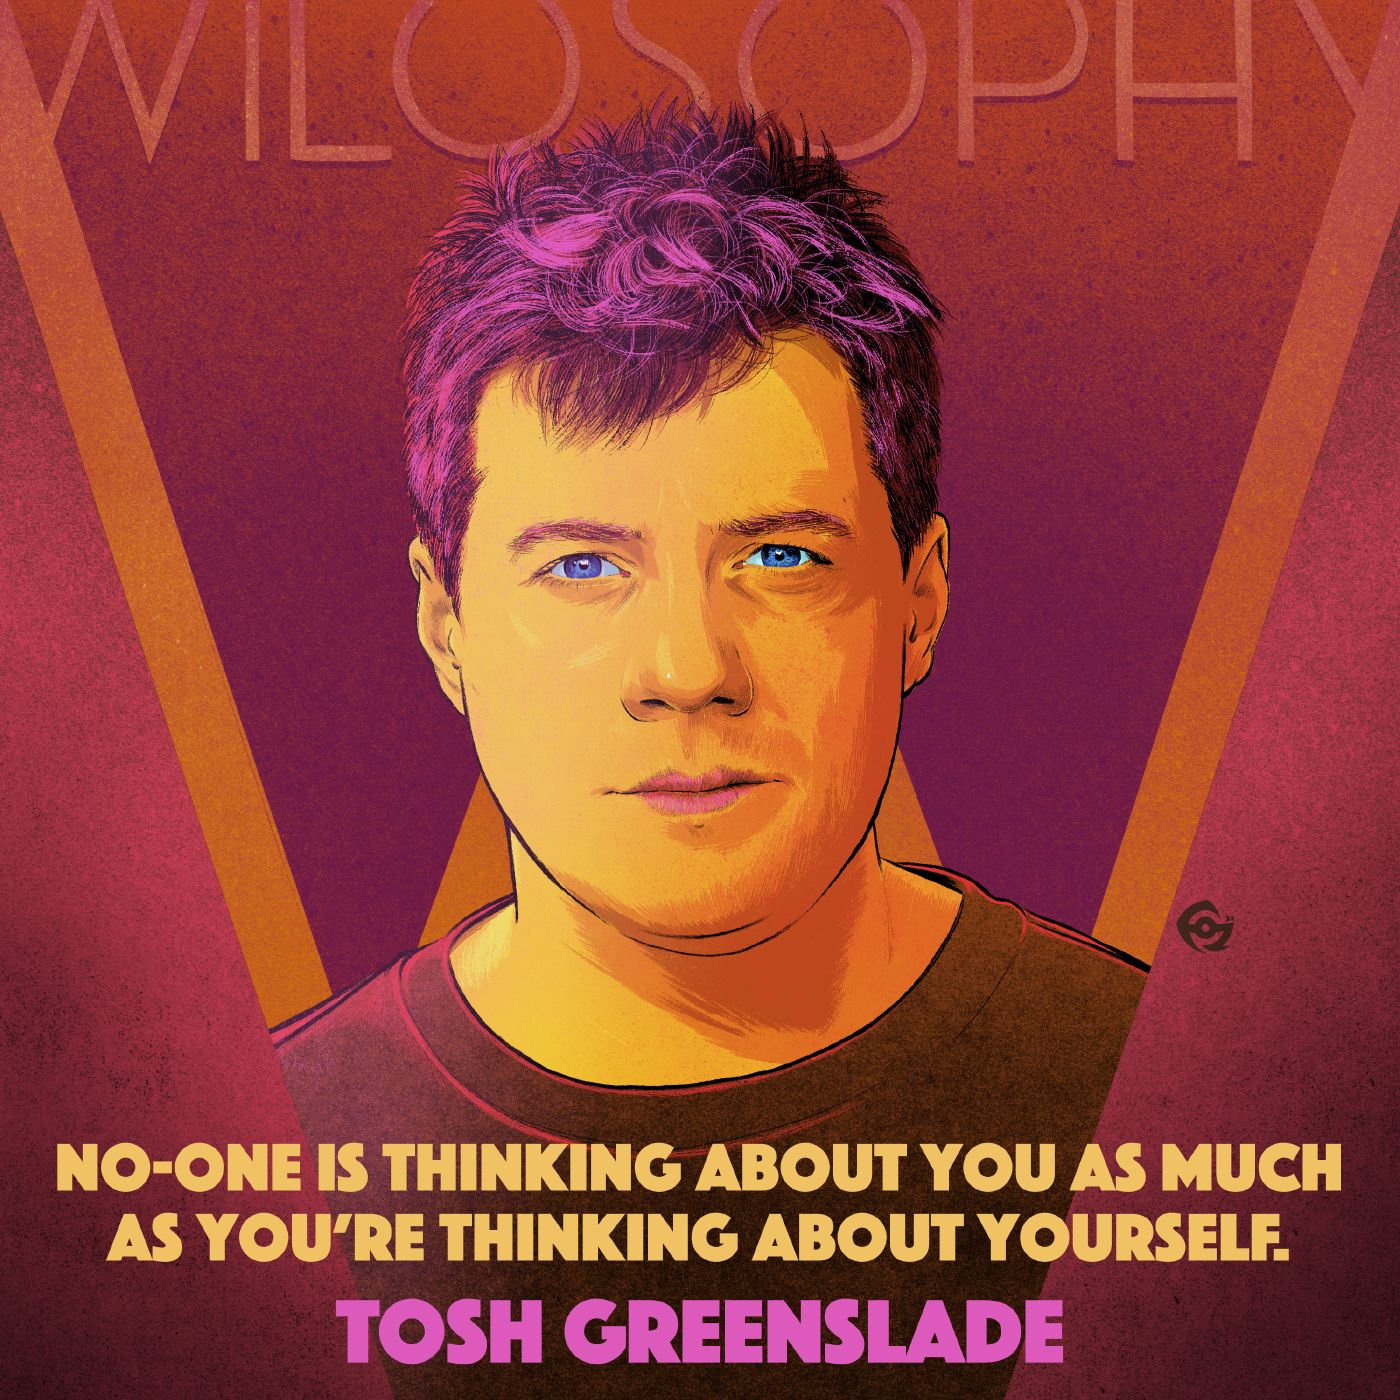 WILOSOPHY with Tosh Greenslade